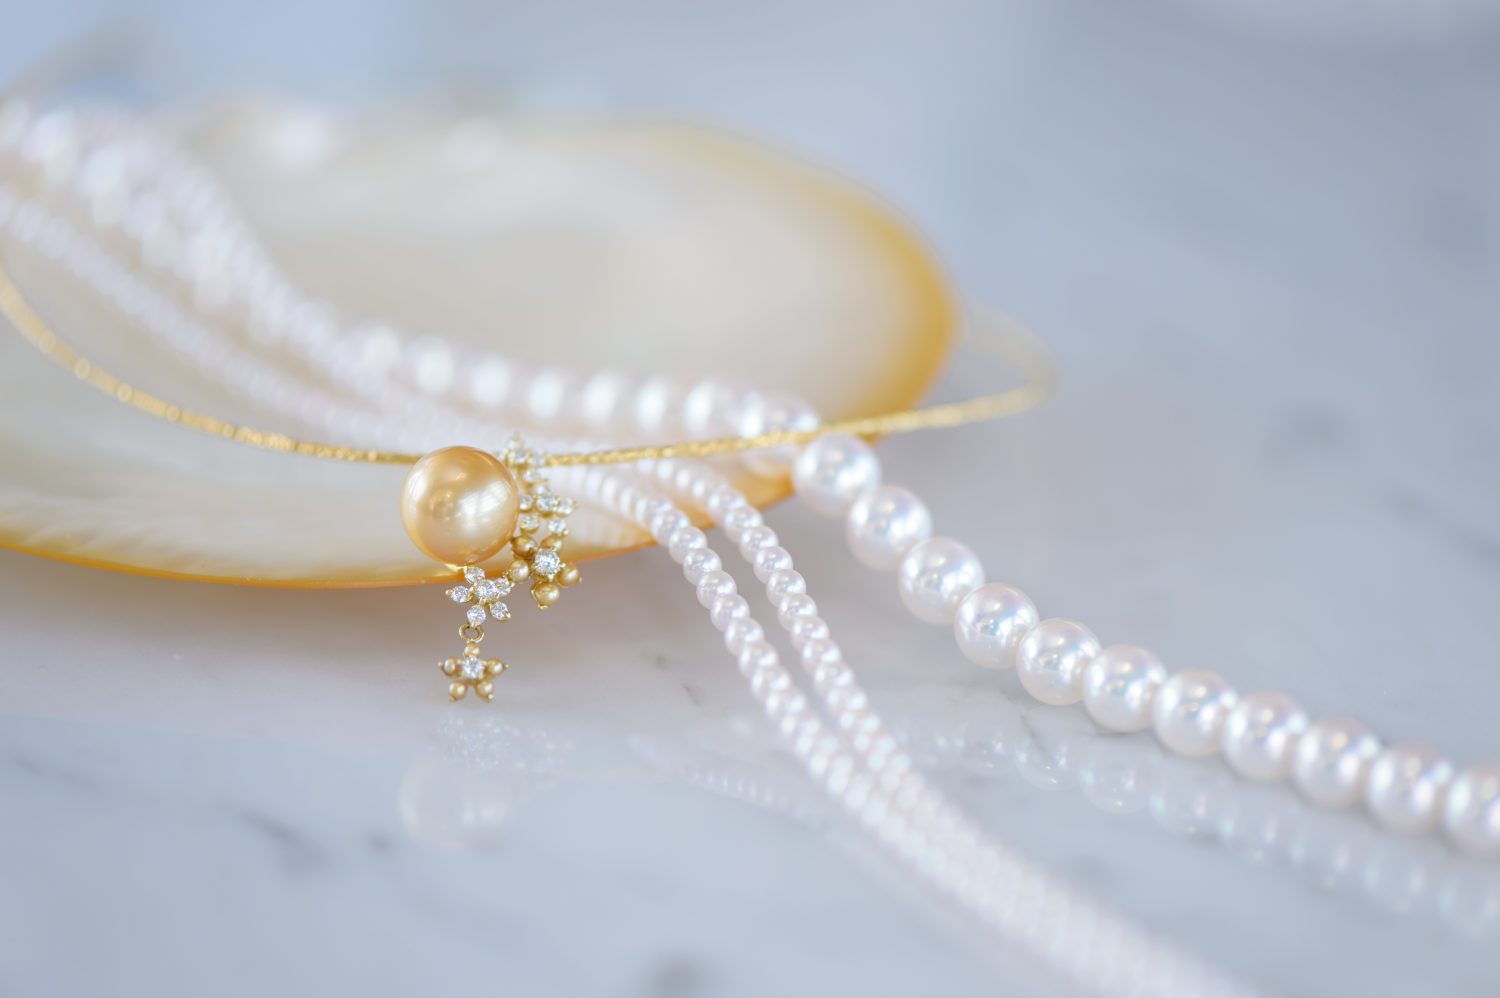 Pearl Necklace as a part of Japanese culture